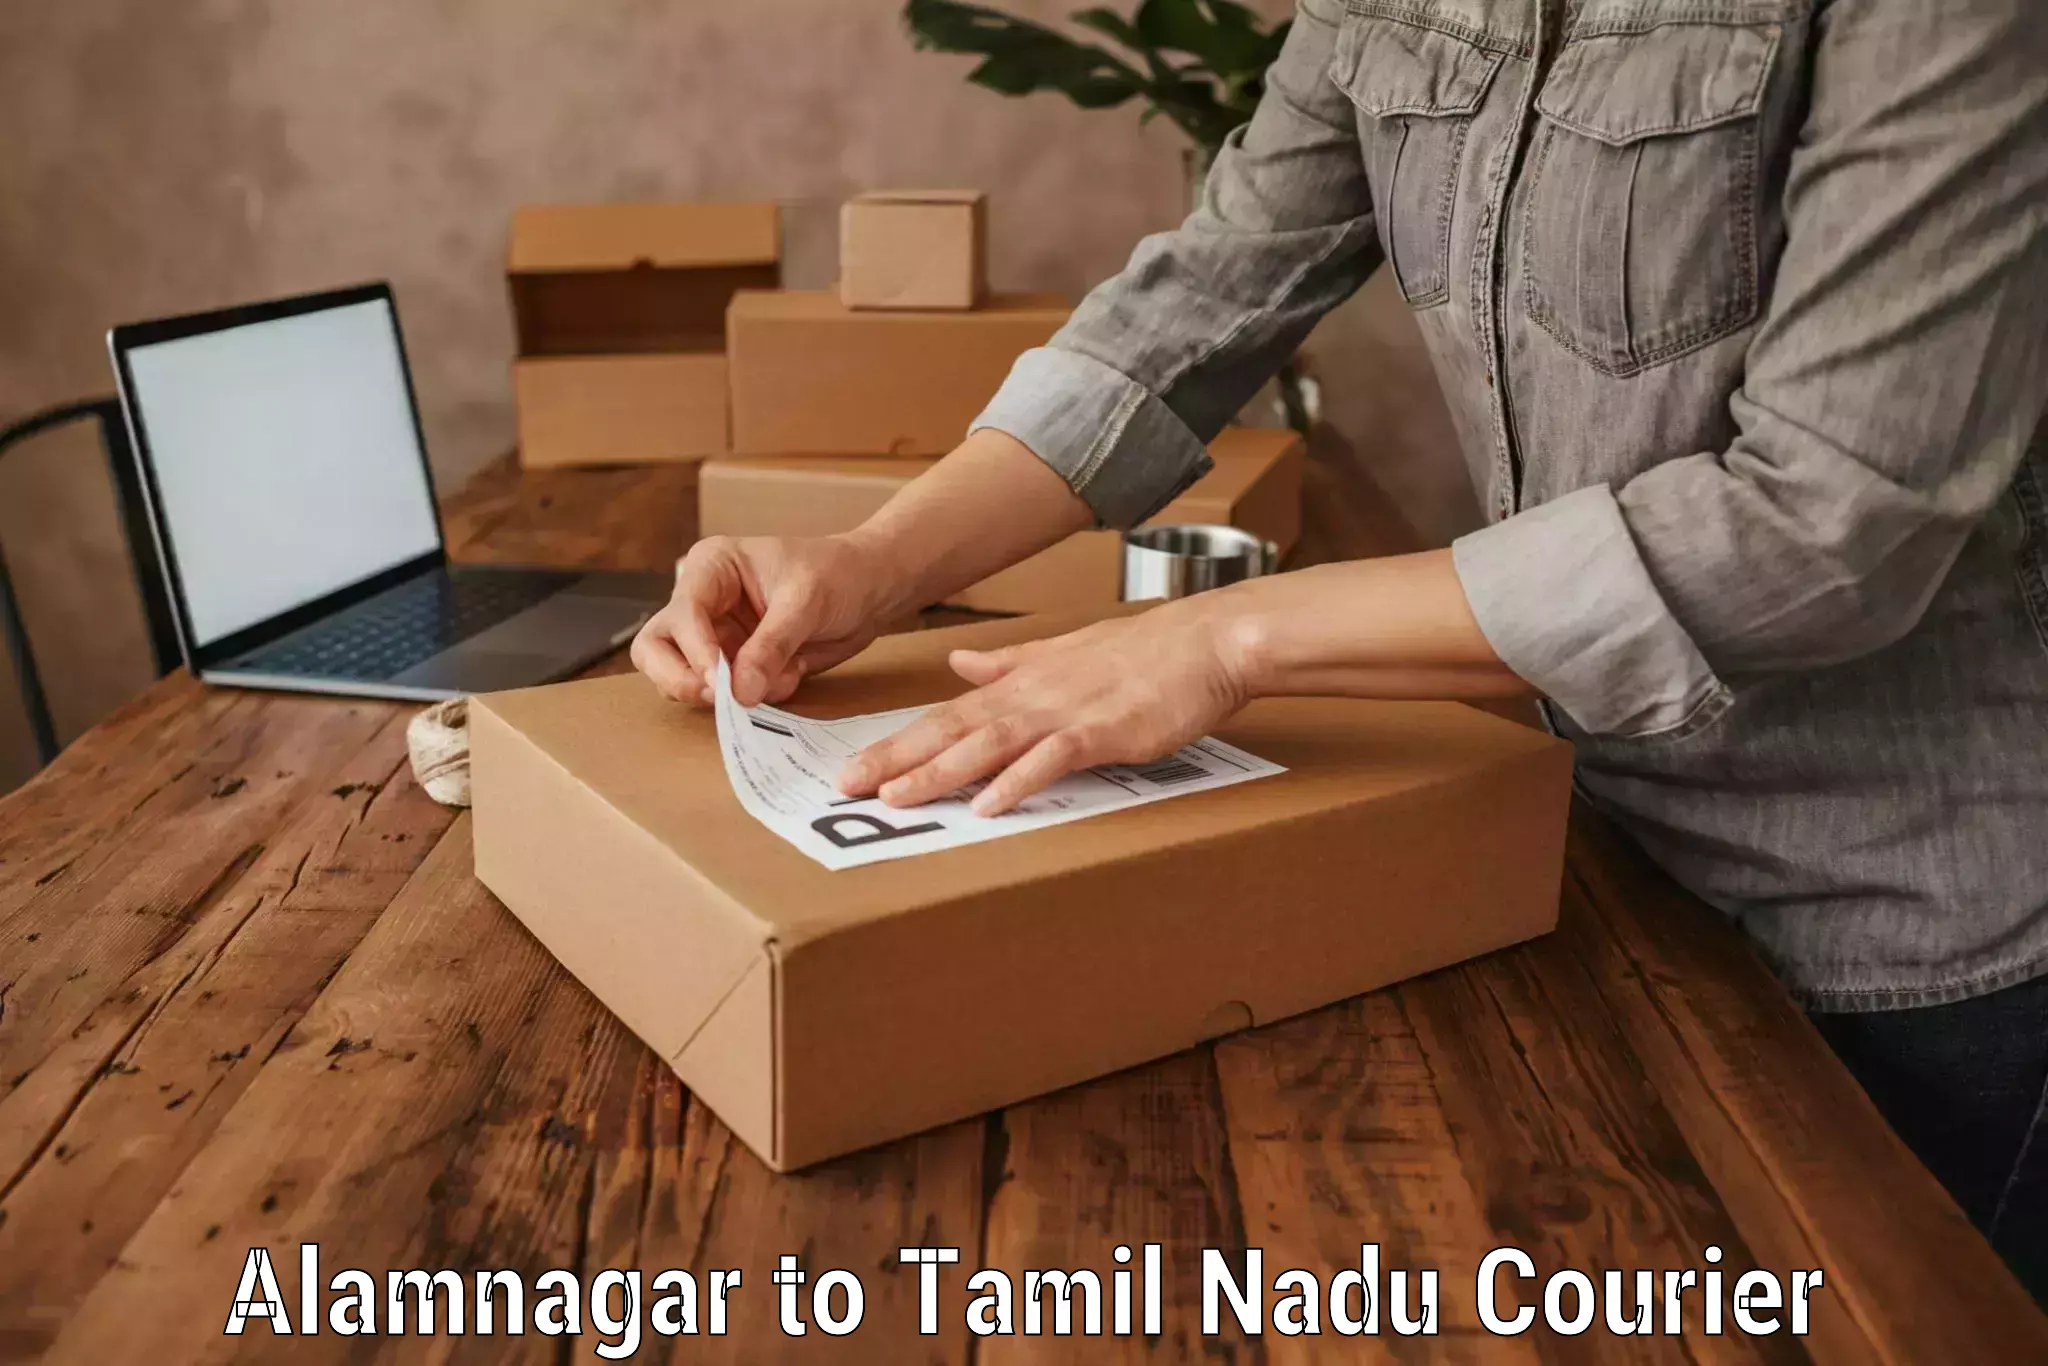 Reliable luggage courier Alamnagar to Ennore Port Chennai